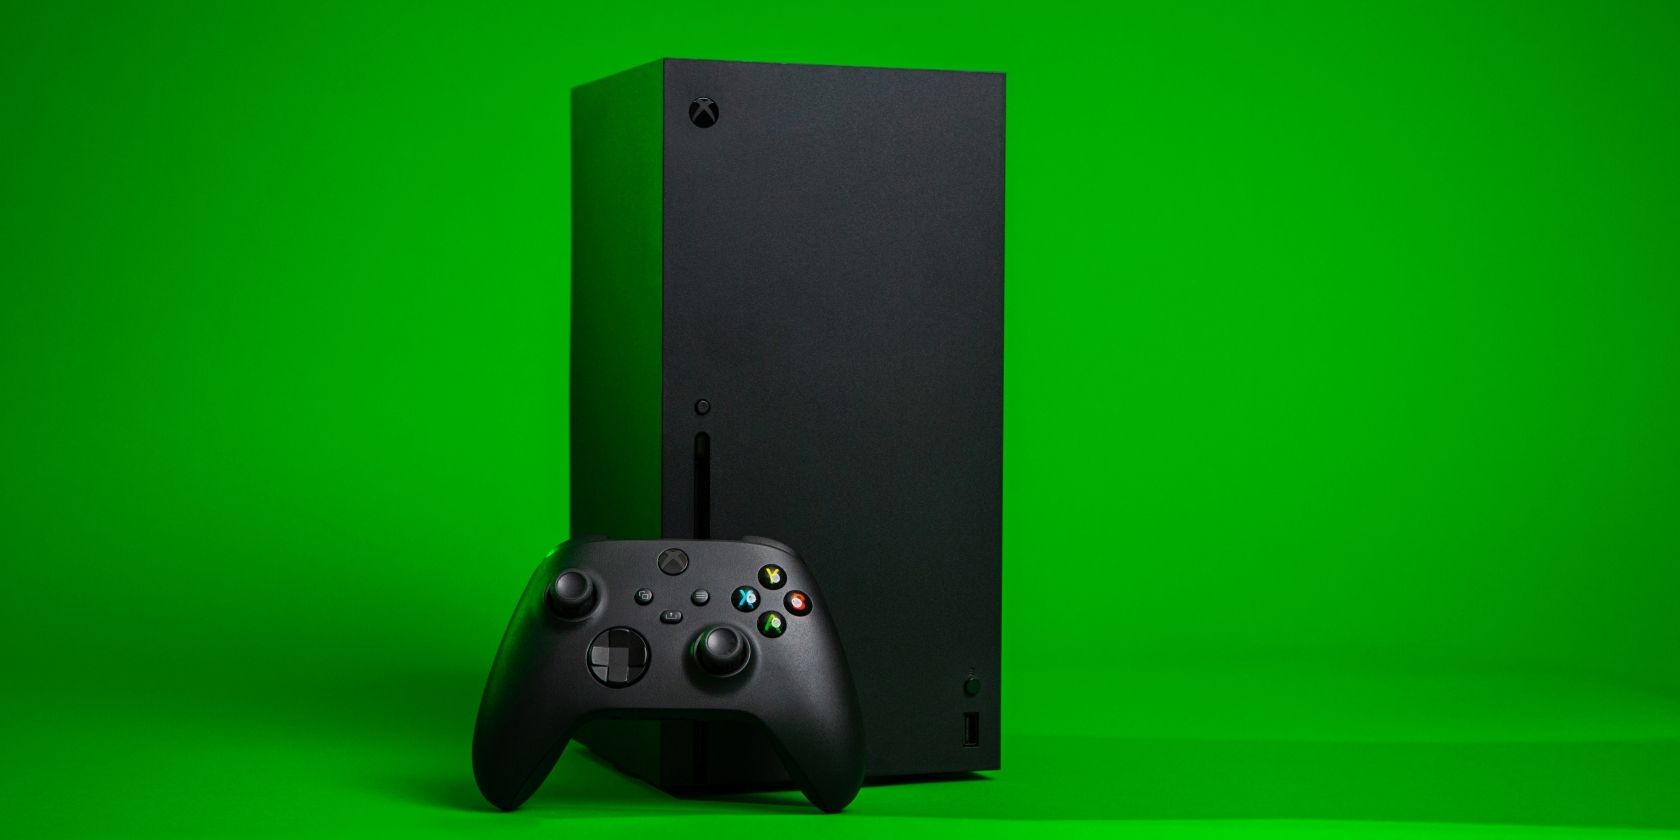 Xbox Game Pass Price Hike Is Inevitable in the Future, According